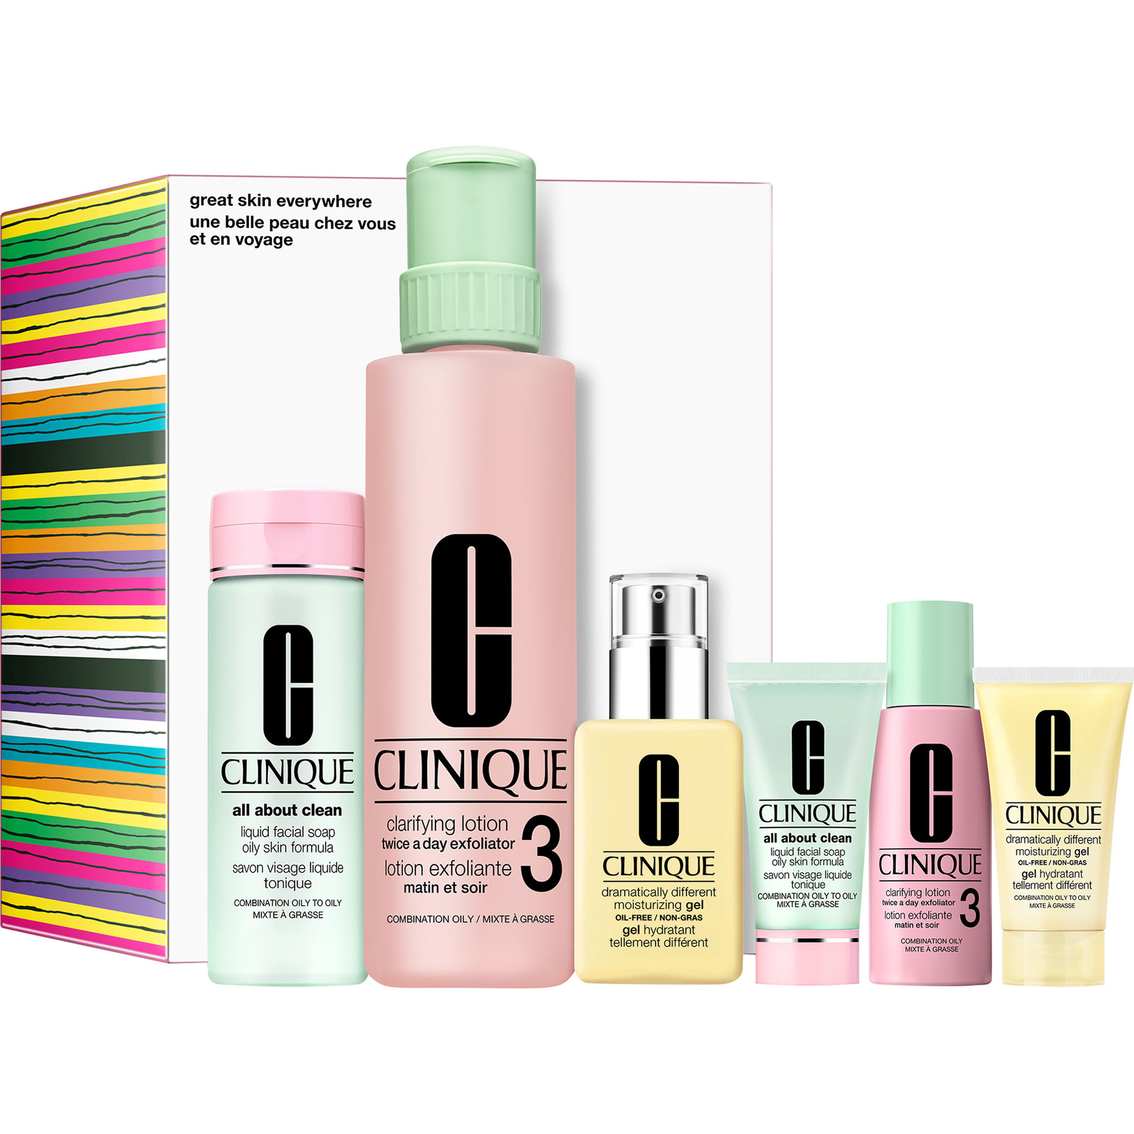 Clinique Great Skin Everywhere: Skincare 6 pc. Set For Oilier Skin - Image 2 of 2